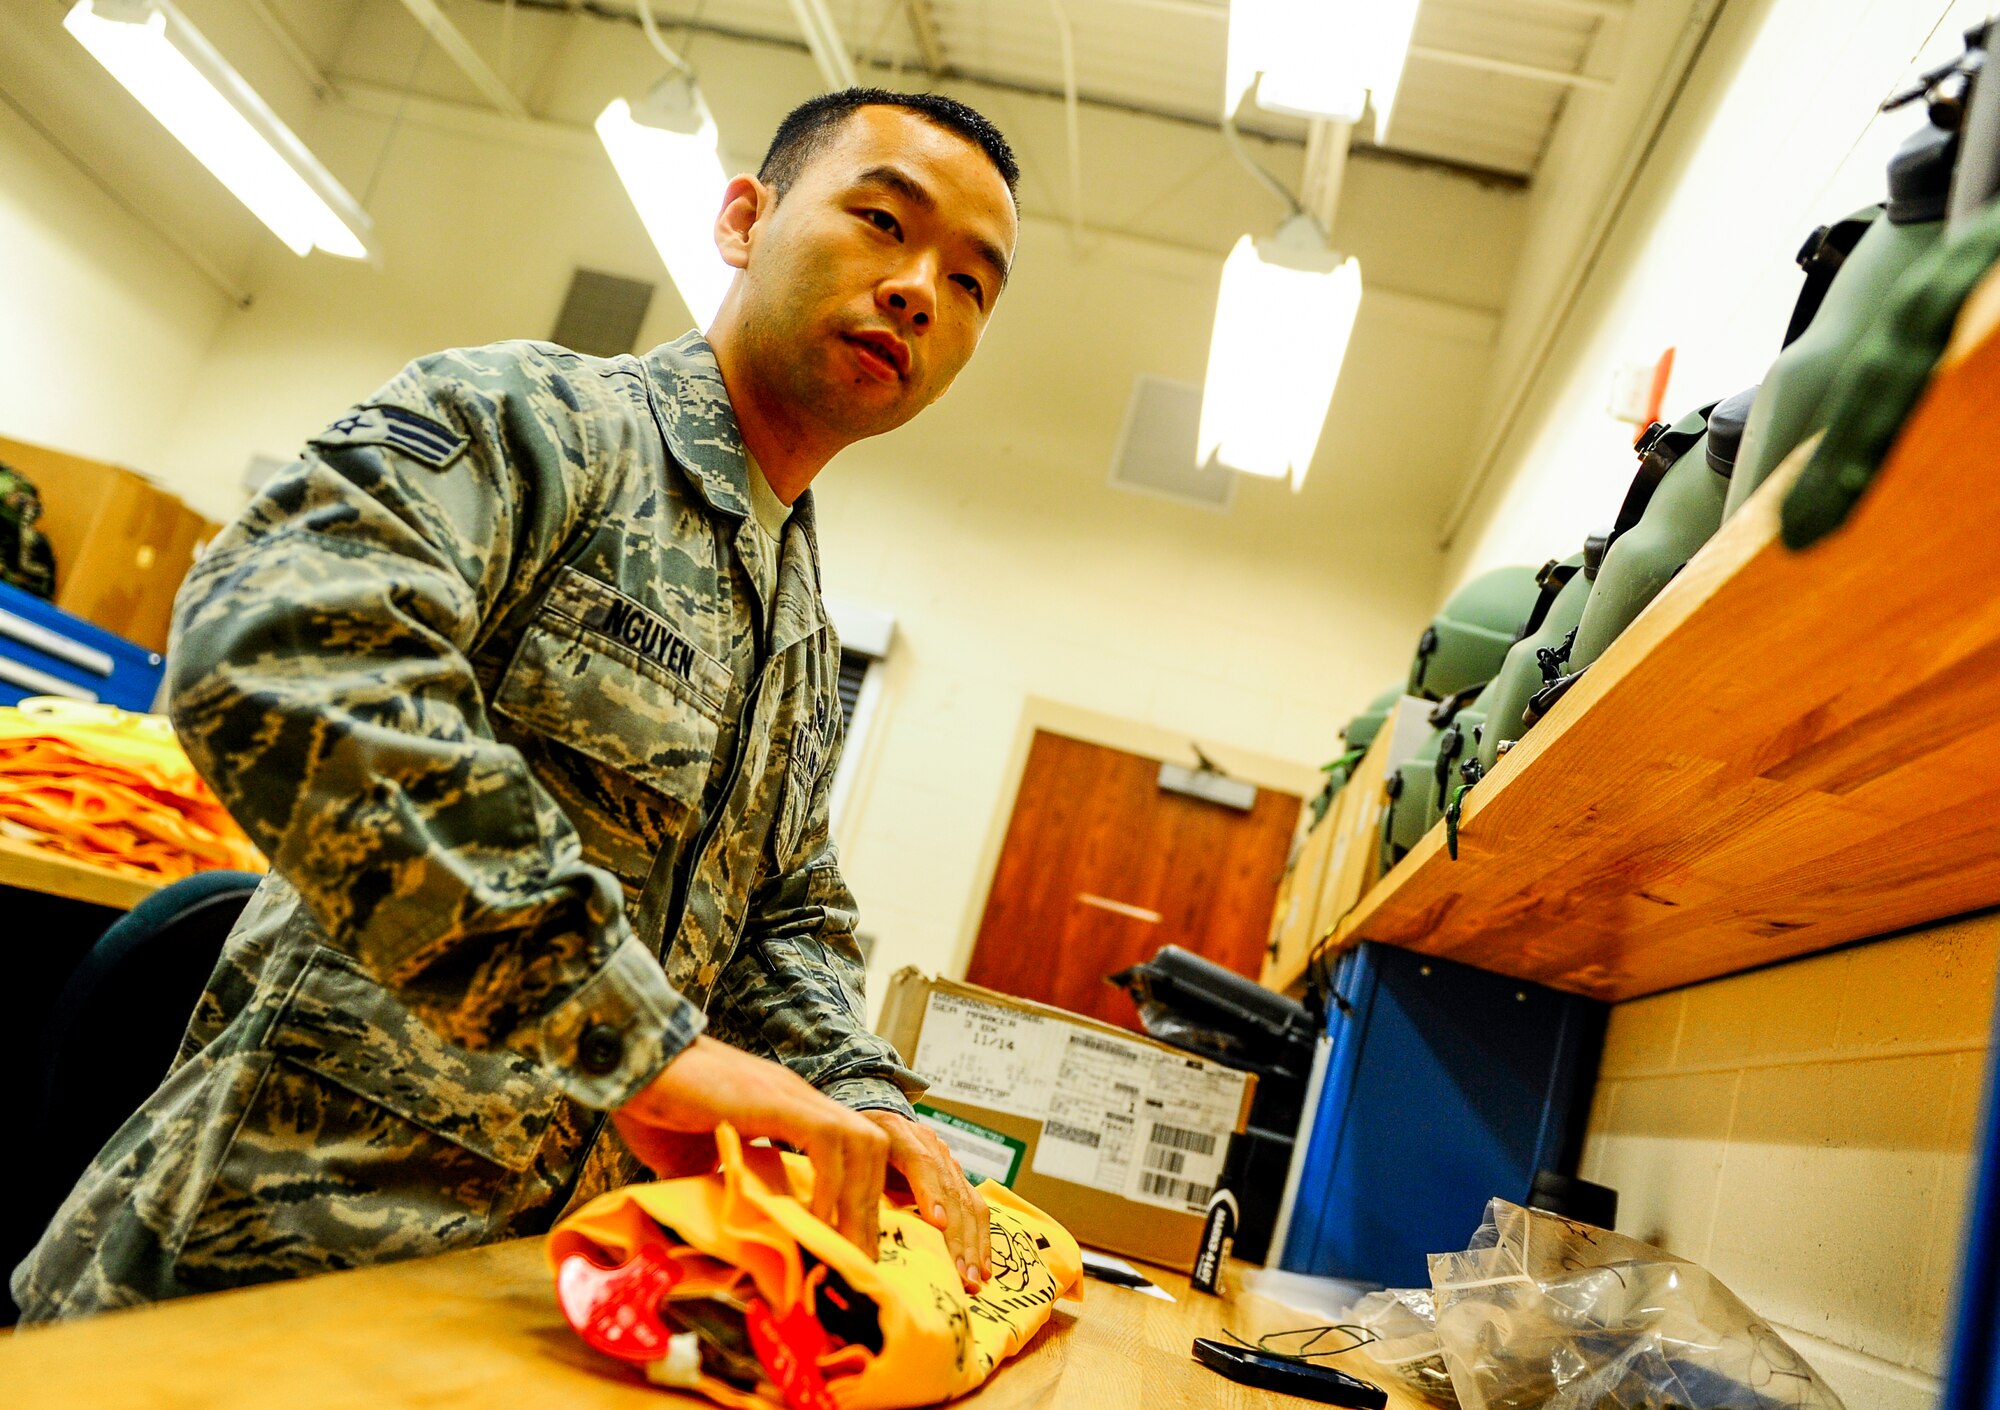 Senior Airman Cuong Nguyen, a 1st Special Operations Support Squadron aircrew flight equipment journeyman, folds a life preserver unit at Hurlburt Field, Fla., Dec. 4, 2014. Nguyen works at the 8th Special Operations Squadron Air Crew Flight Equipment office. (U.S. Air Force photo/Senior Airman Christopher Callaway)